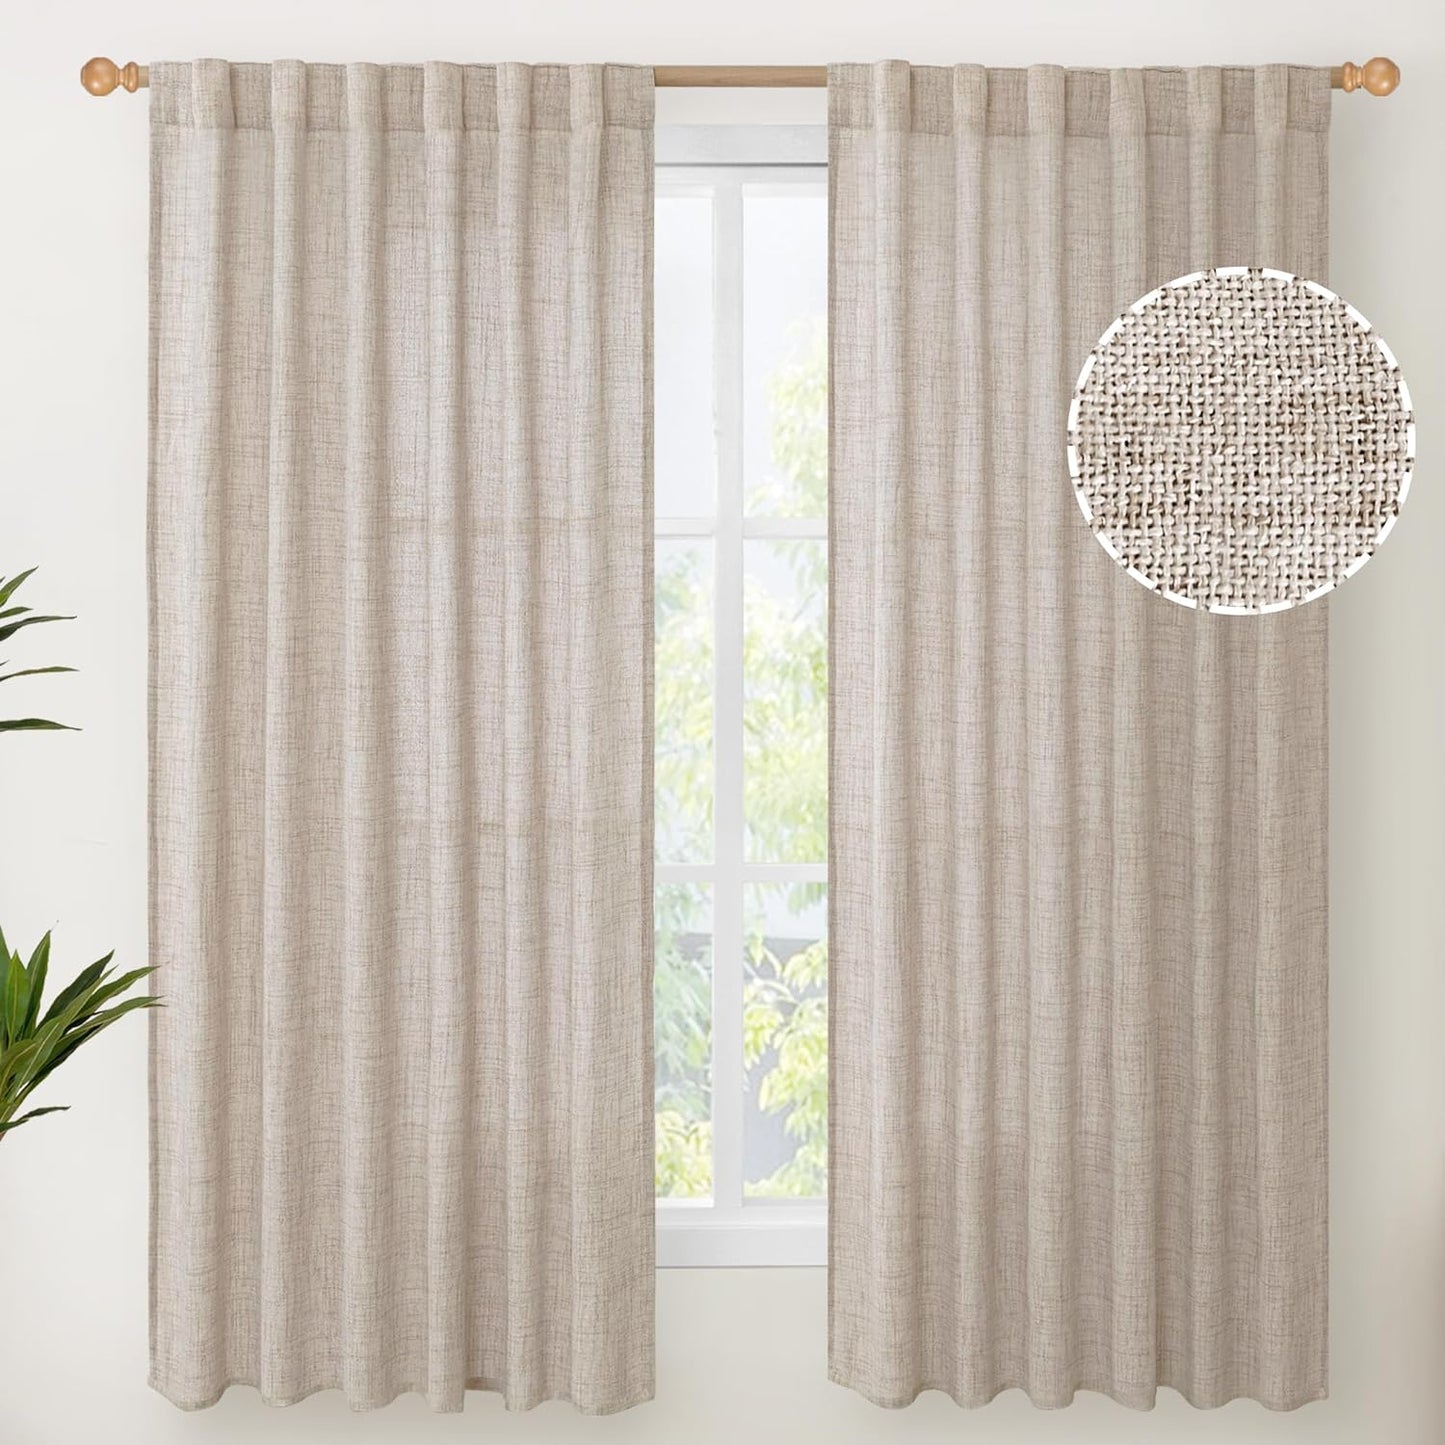 Youngstex Natural Linen Curtains 72 Inch Length 2 Panels for Living Room Light Filtering Textured Window Drapes for Bedroom Dining Office Back Tab Rod Pocket, 52 X 72 Inch  YoungsTex Natural 52W X 63L 